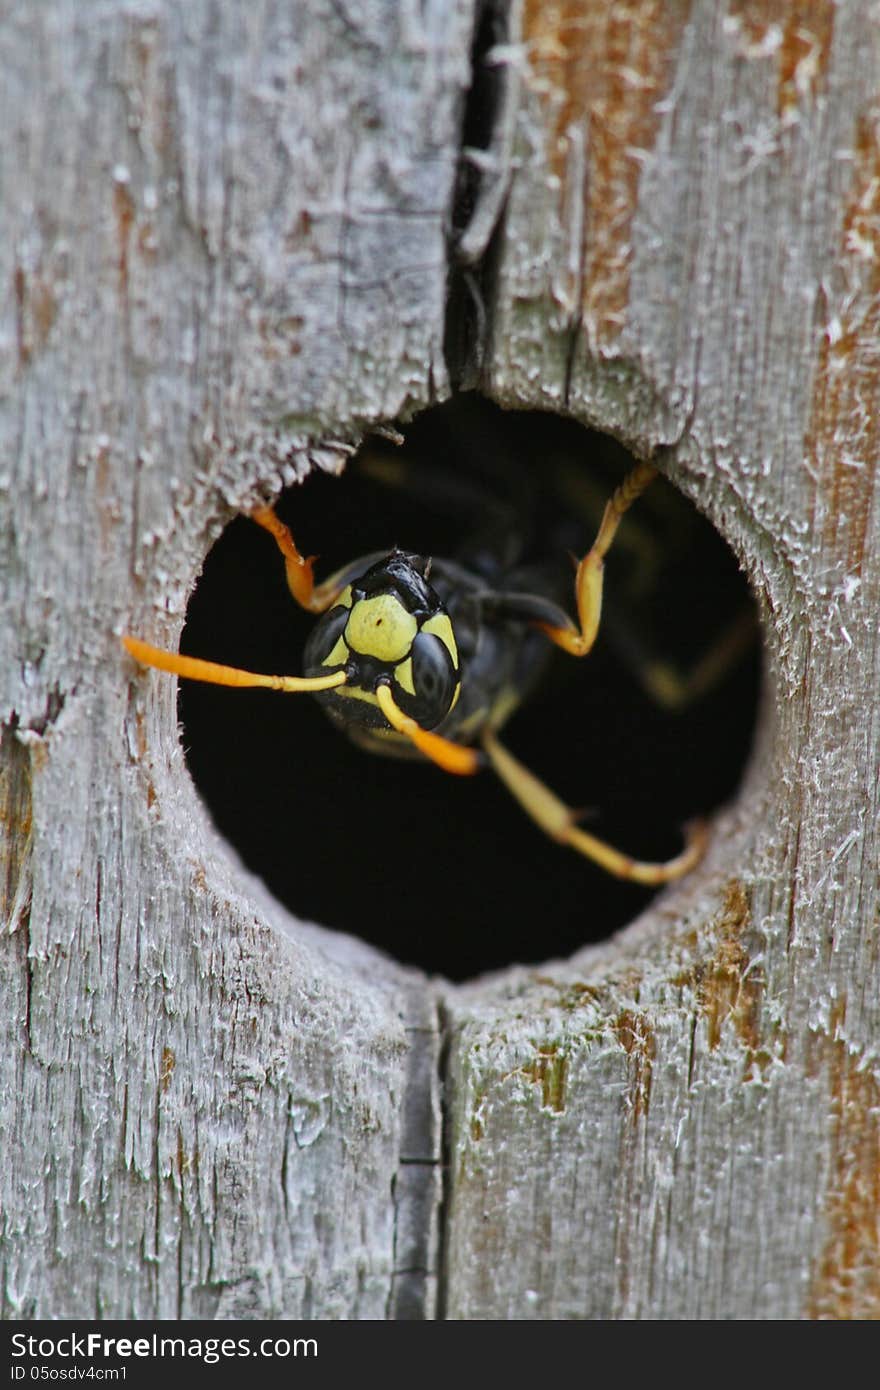 A close up of a wasp emerging upside down from its nest box in our garden. A close up of a wasp emerging upside down from its nest box in our garden.